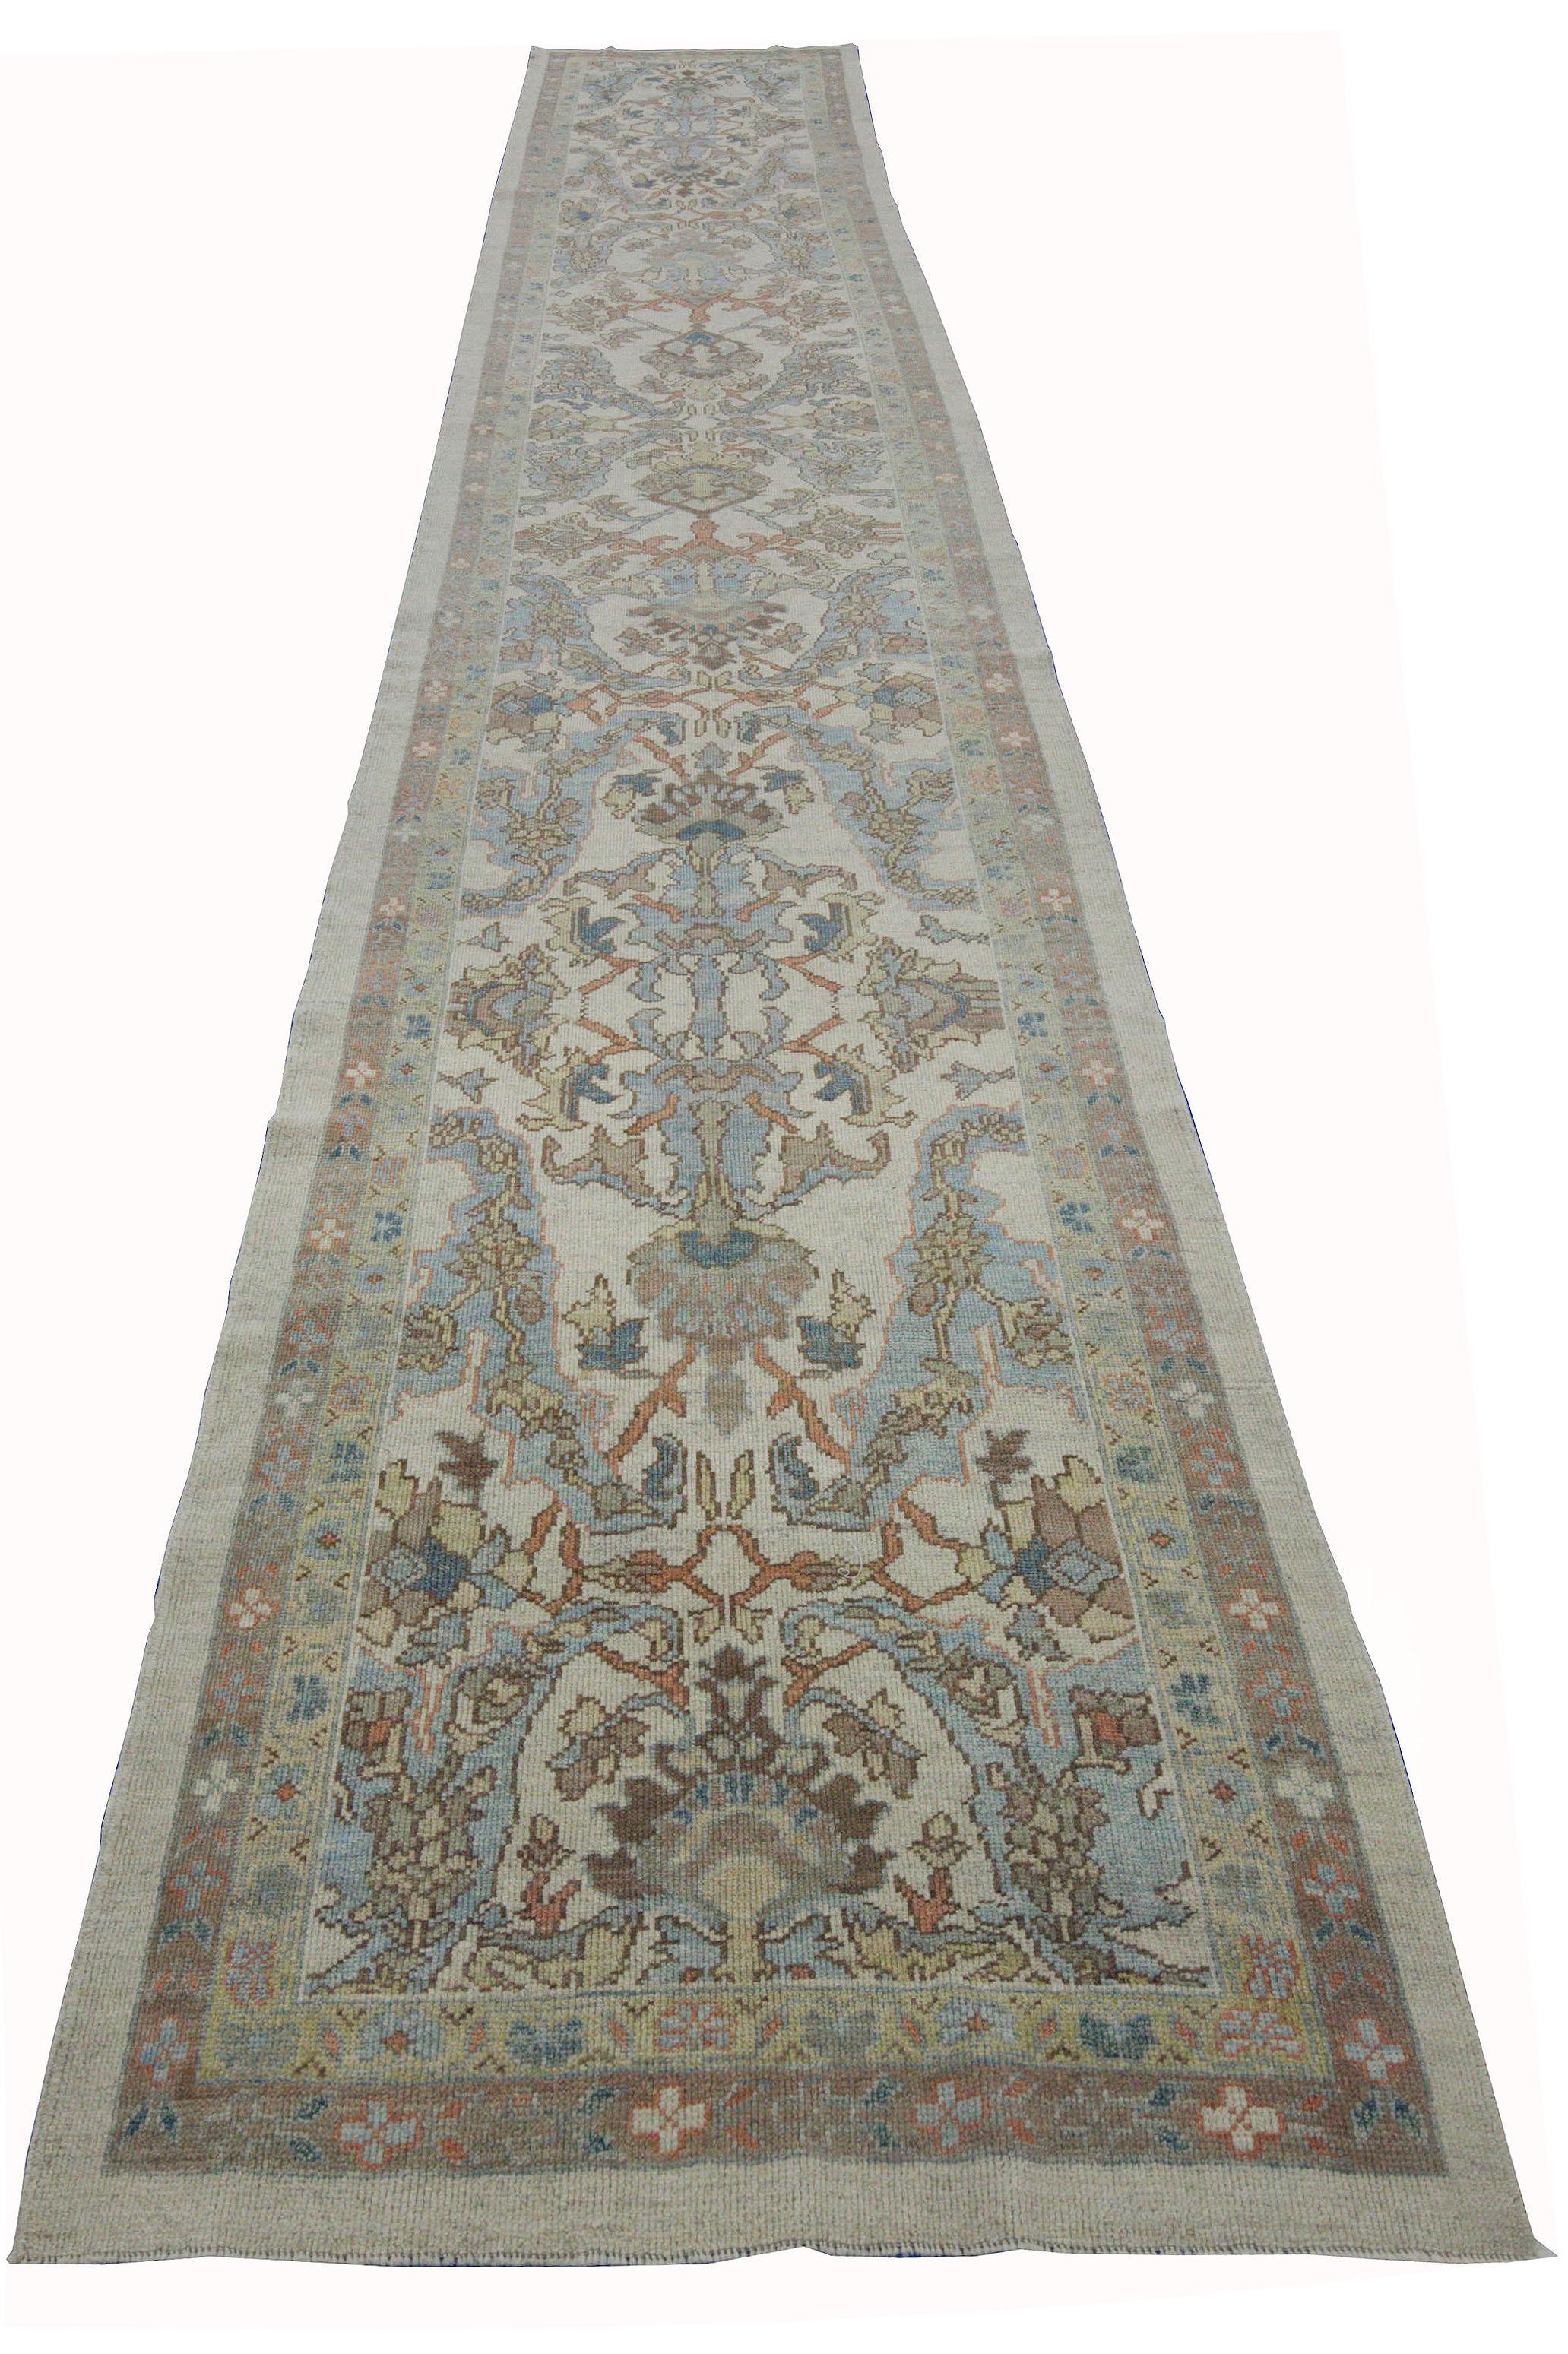 New Turkish runner rug made of handwoven sheep’s wool of the finest quality. It’s colored with organic vegetable dyes that are certified safe for humans and pets alike. It features a large, ivory field with blue flower details allover associated